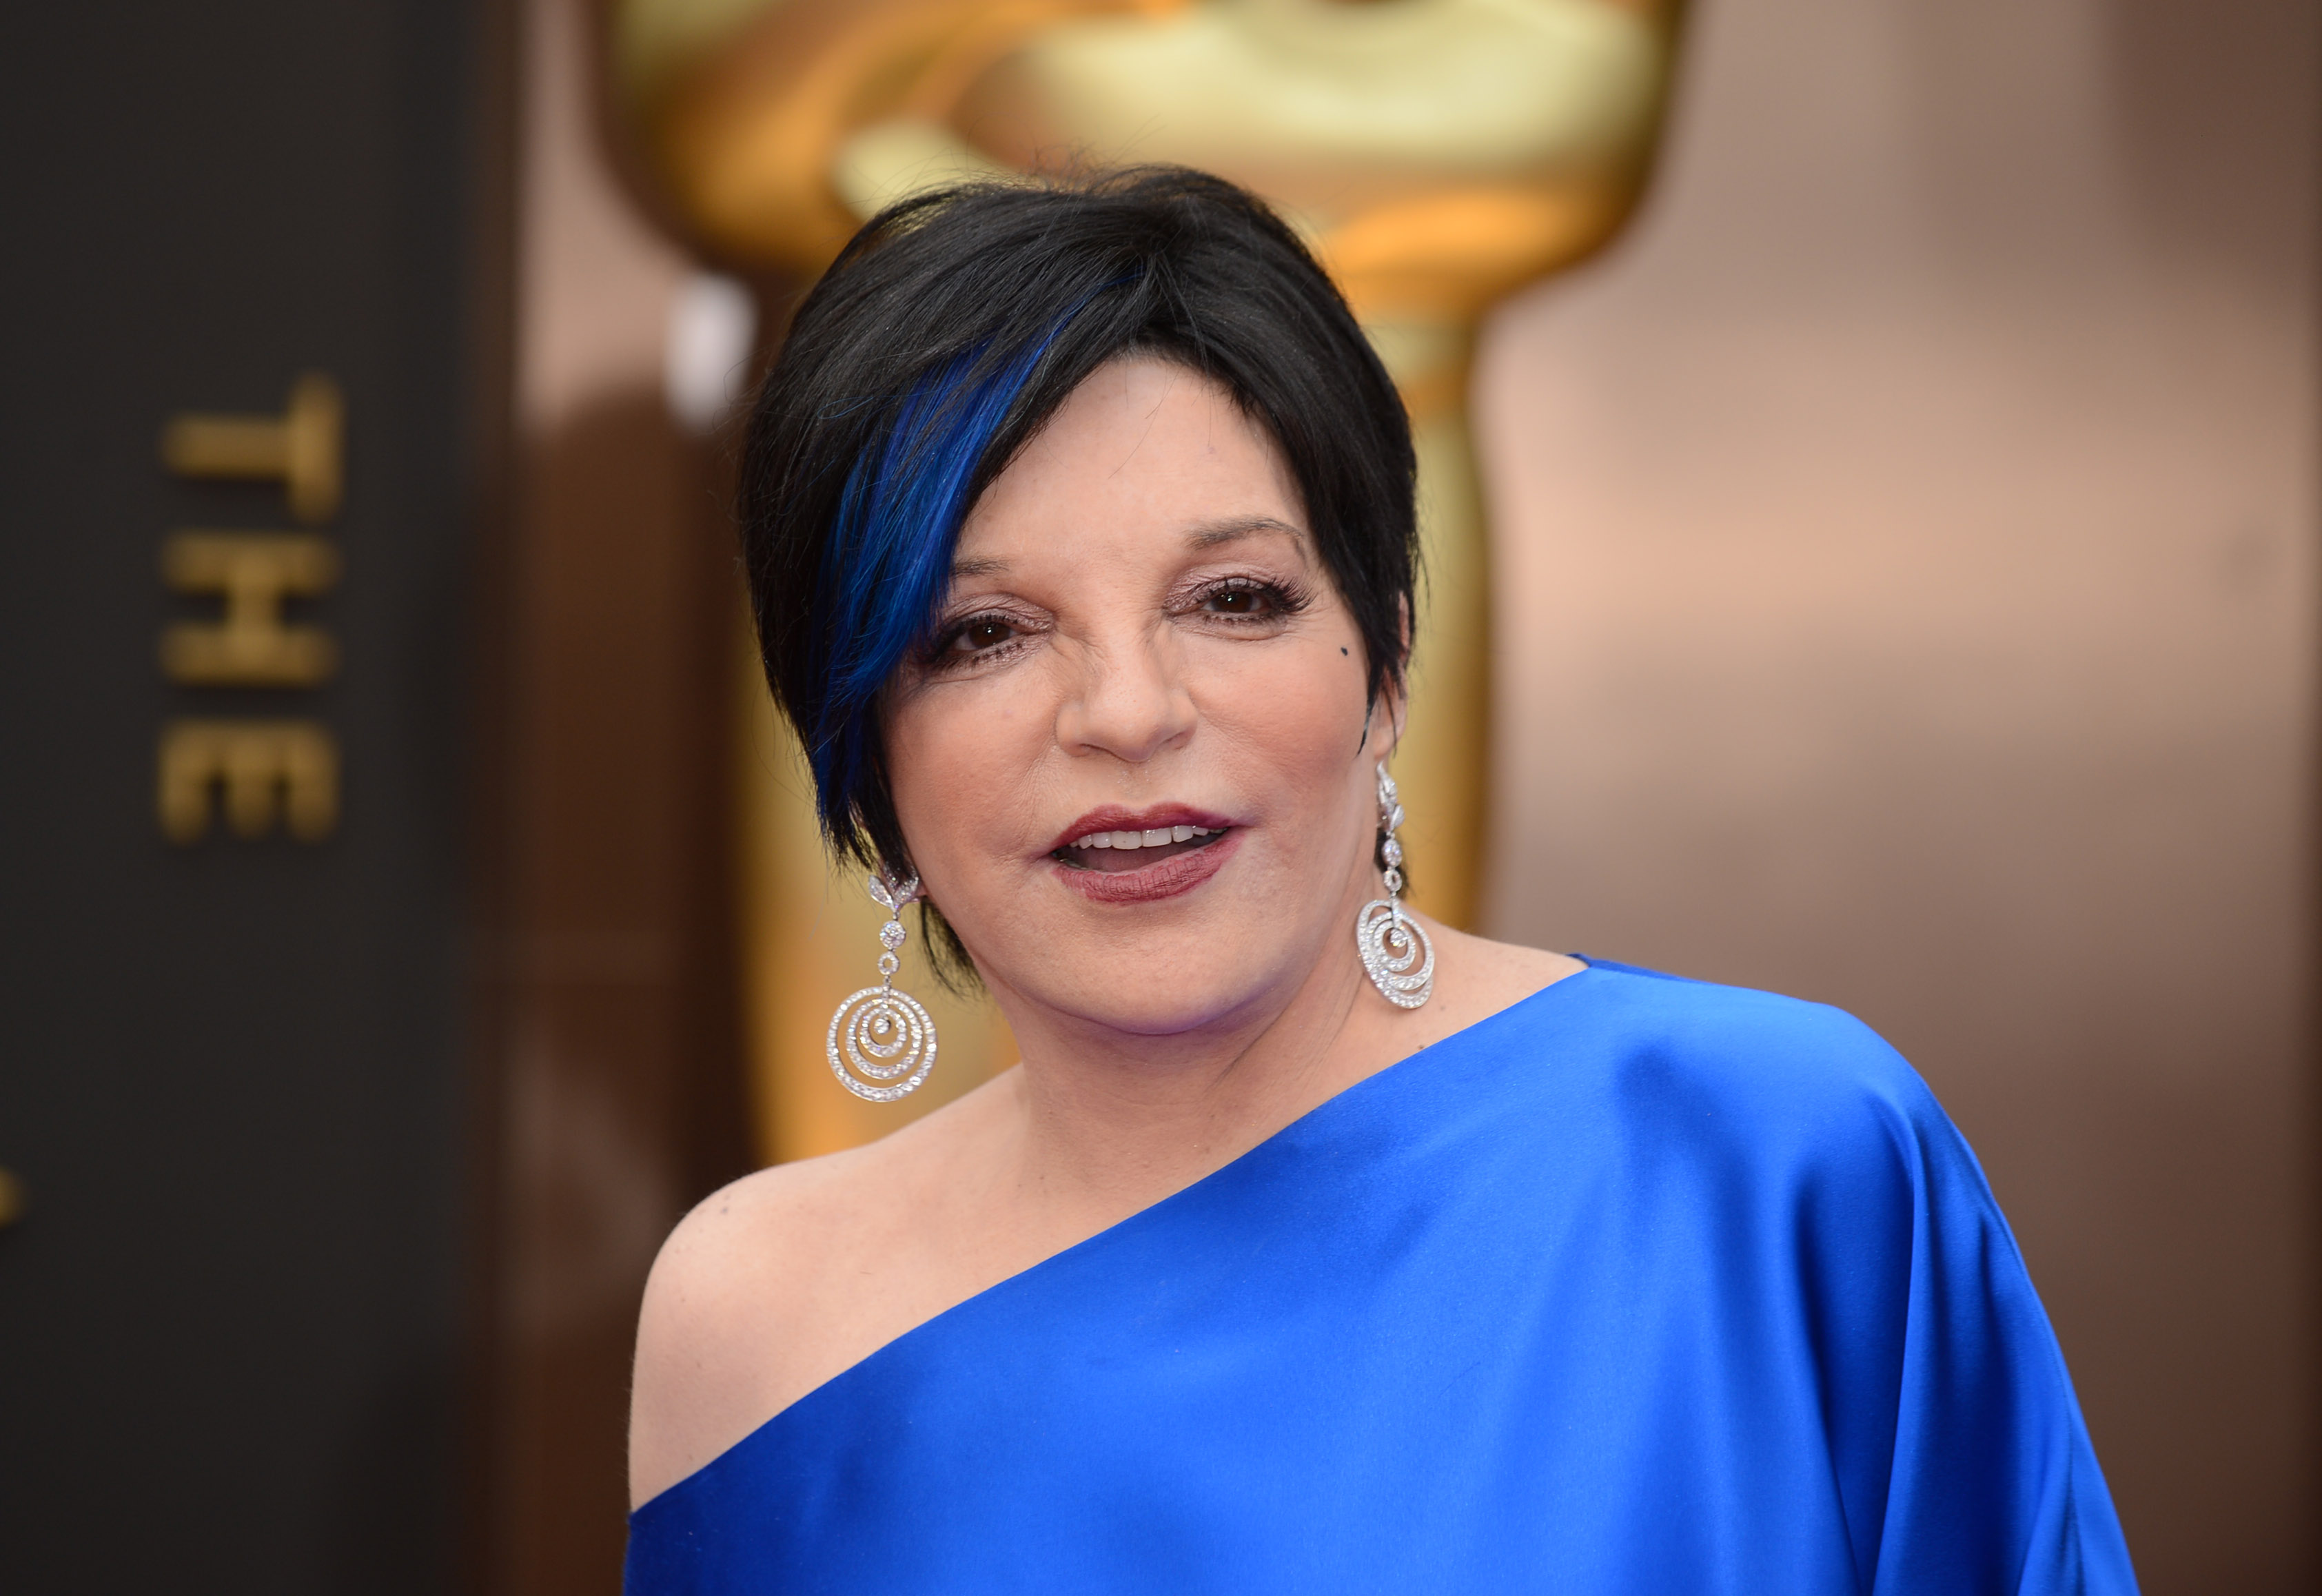 <p>Don't get us wrong, we love Liza Minnelli. But didn't she look a little different during the 2014 Oscars? While the singer-actress has never commented on plastic surgery rumors, it's difficult to believe that her looks could've changed so much over the years without some help.</p>